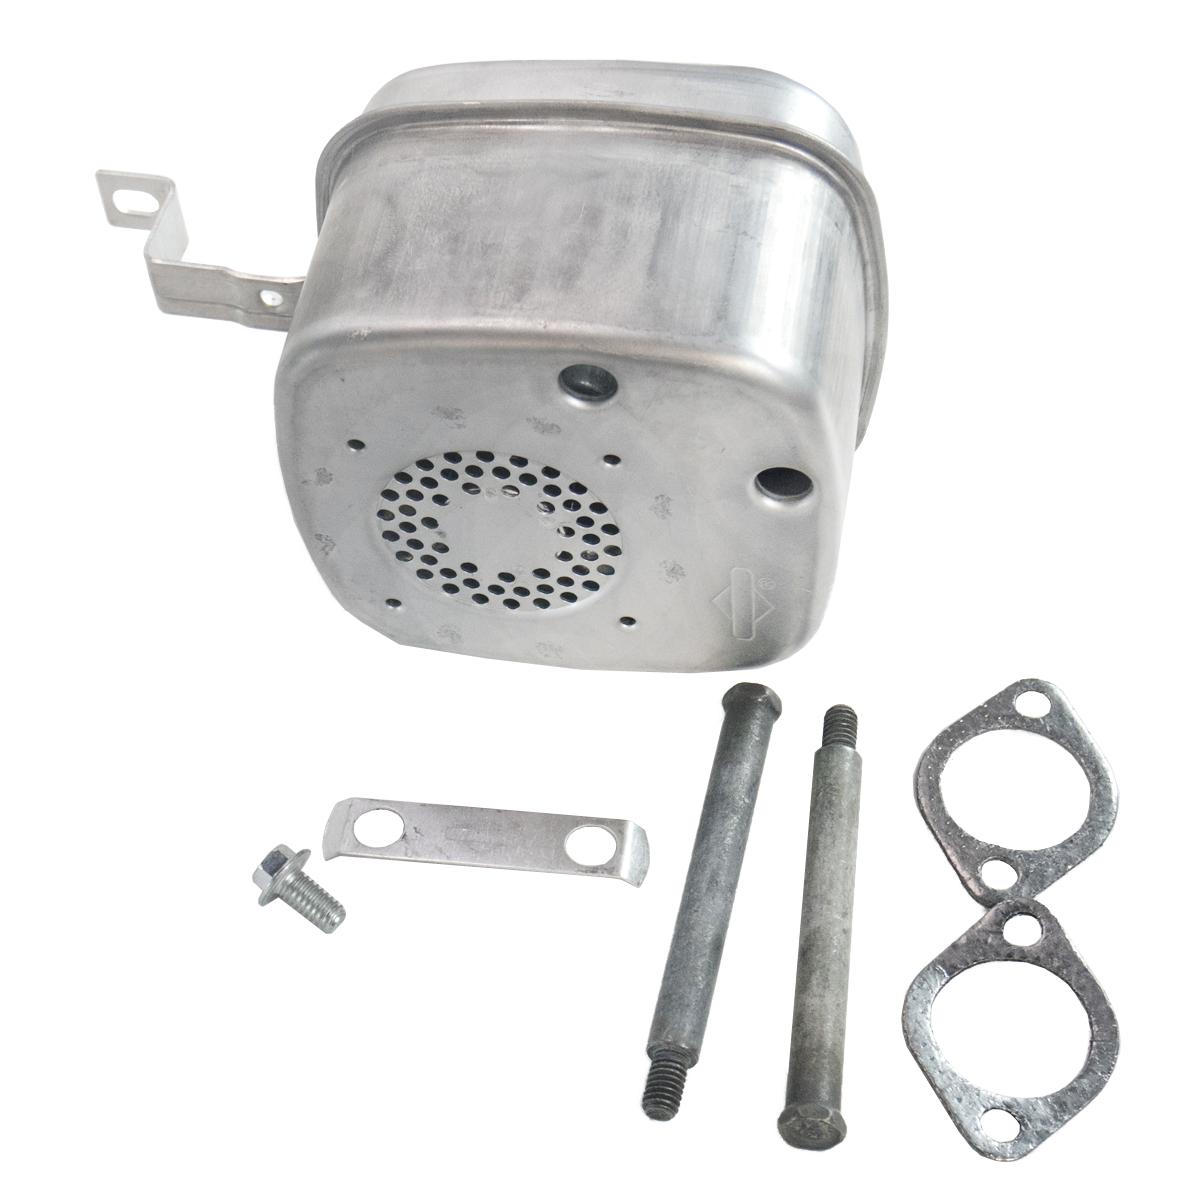 Muffler & Adapter to fit OHV engines from 9-18hp, Models include any starting with 28 & 31 Briggs & Stratton Engine Parts